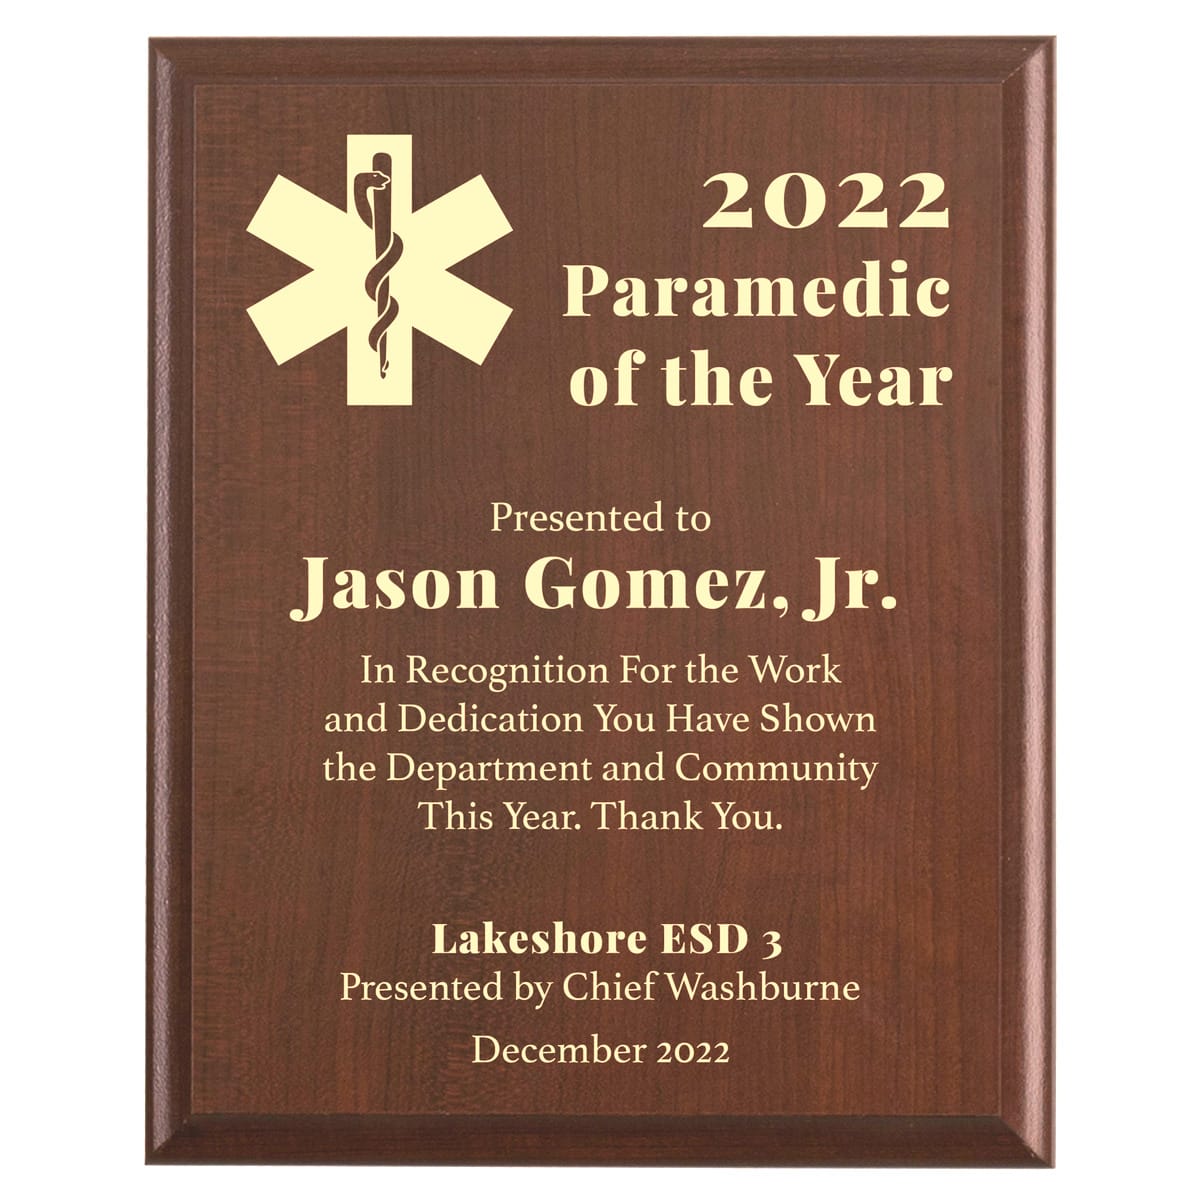 Plaque photo: Paramedic of the Year Award Plaque design with free personalization. Wood style finish with customized text.